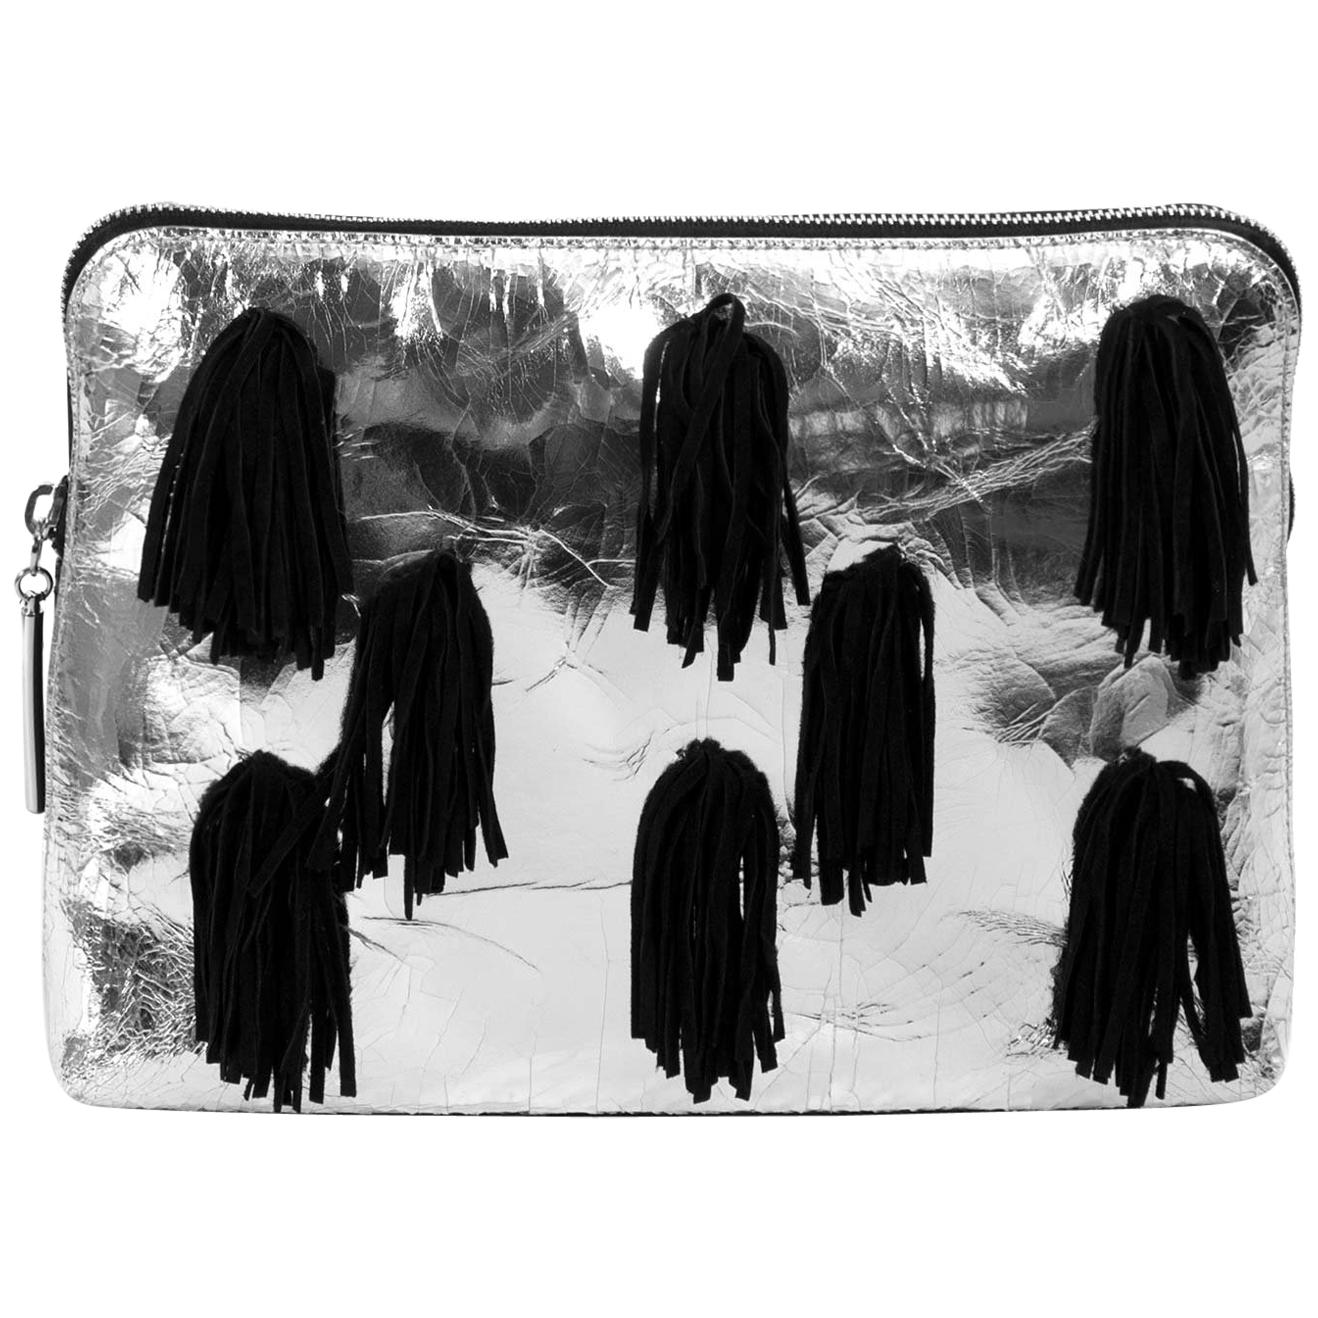 3.1 Phillip Lim 31 Minute Suede-Fringed Metallic Leather Clutch For Sale